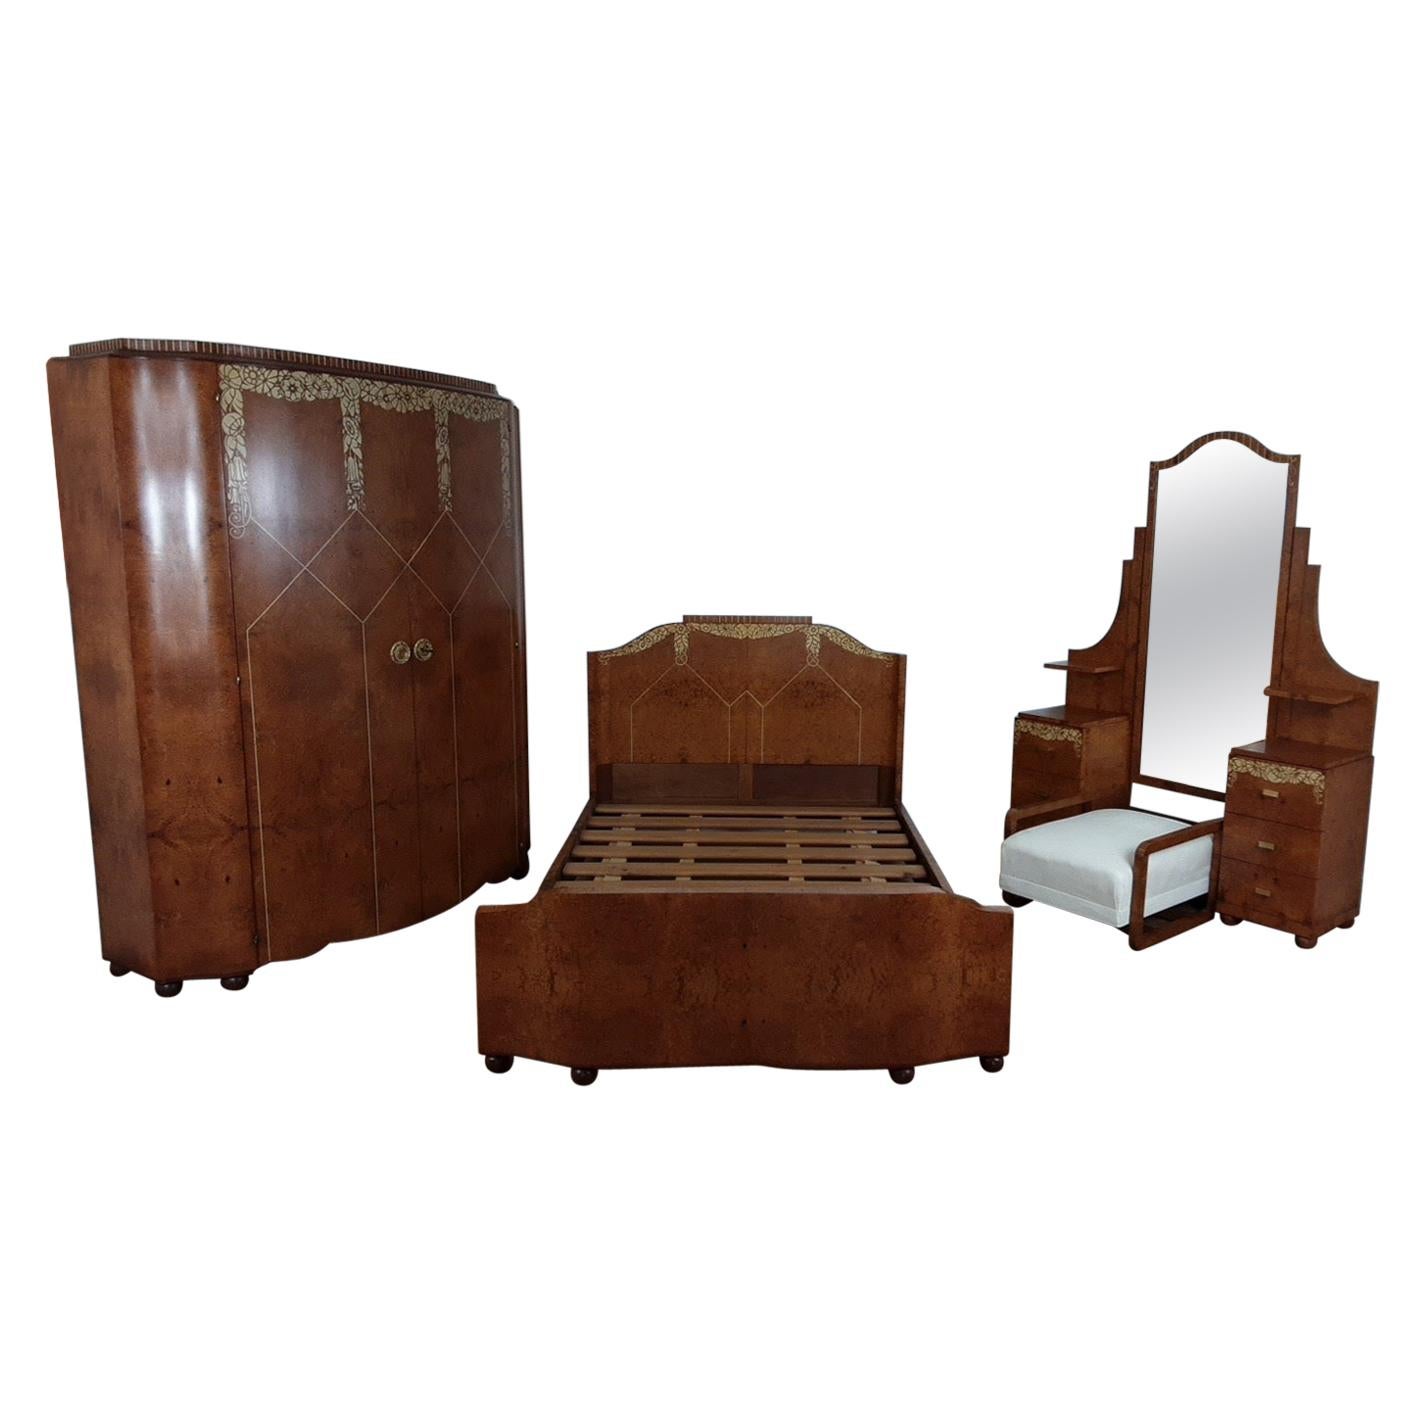 Art Deco Bedroom Suite by Mercier Freres in Satin Maple with Inlaid Floral Motif For Sale